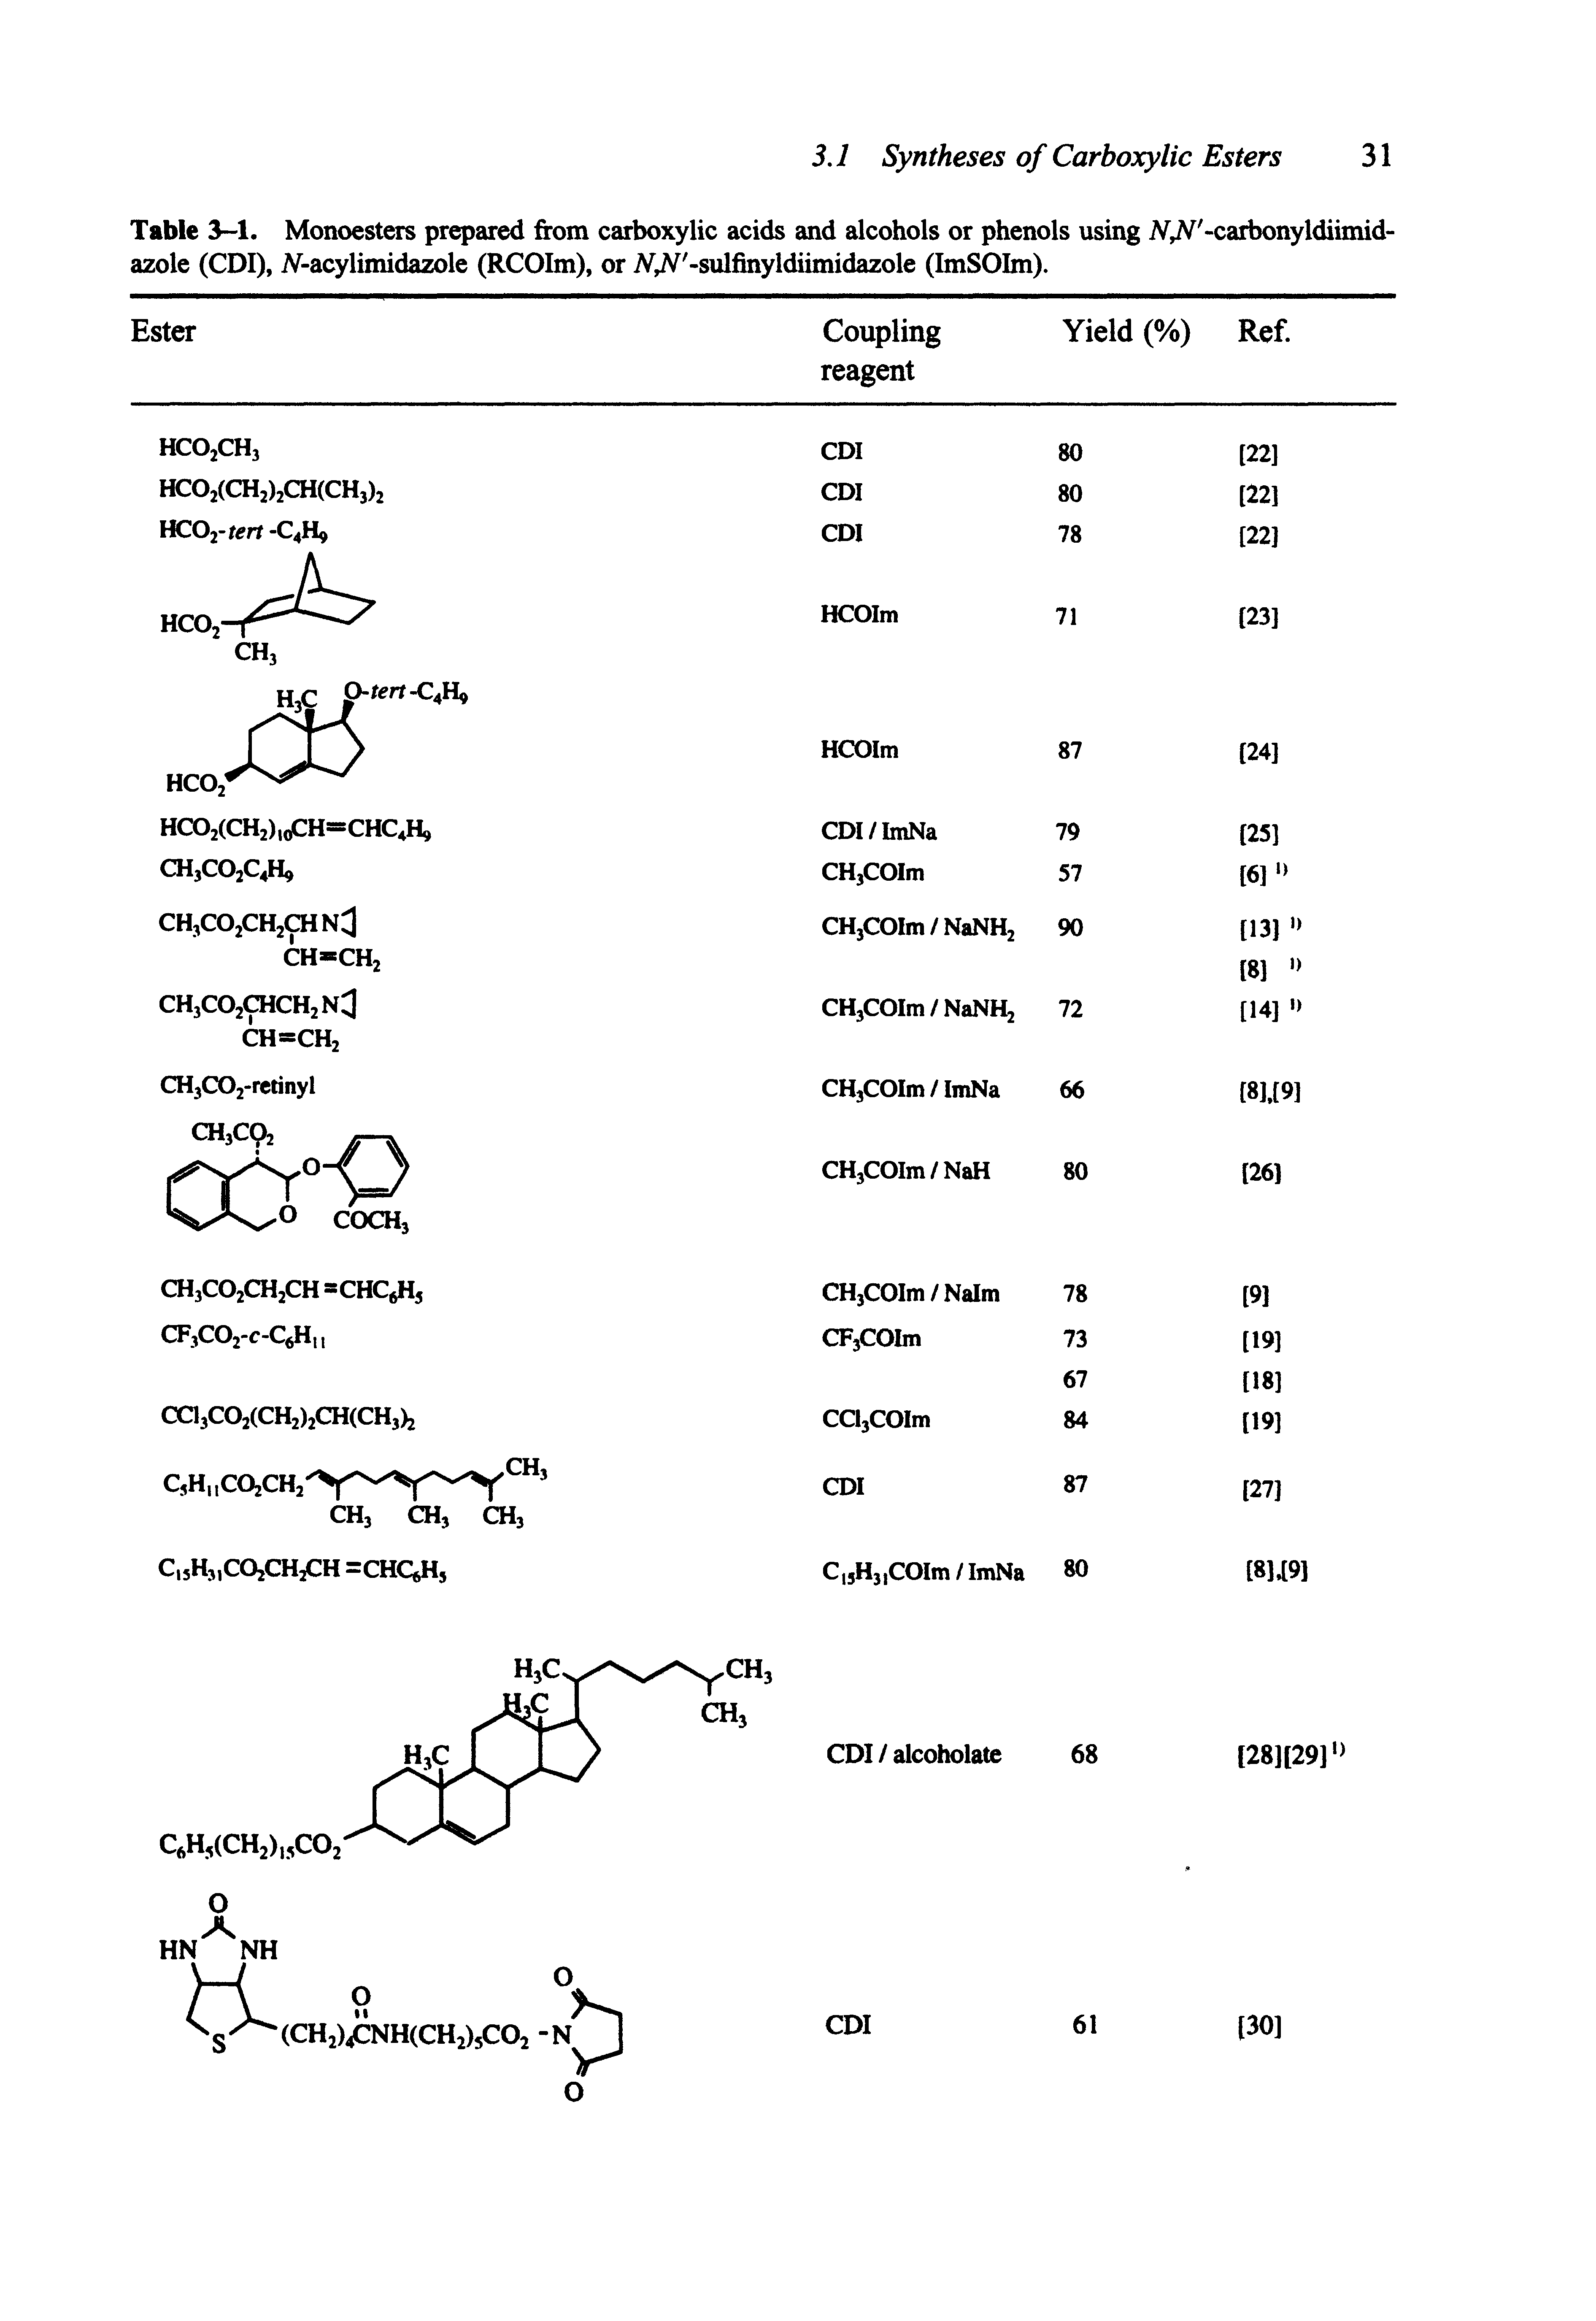 Table 3-1. Monoesters prepared from carboxylic acids and alcohols or phenols using AyV -carbonyldiimid-azole (CDI), N-acylimidazole (RCOIm), or AyV -sulfinyldiimidazole (ImSOIm).